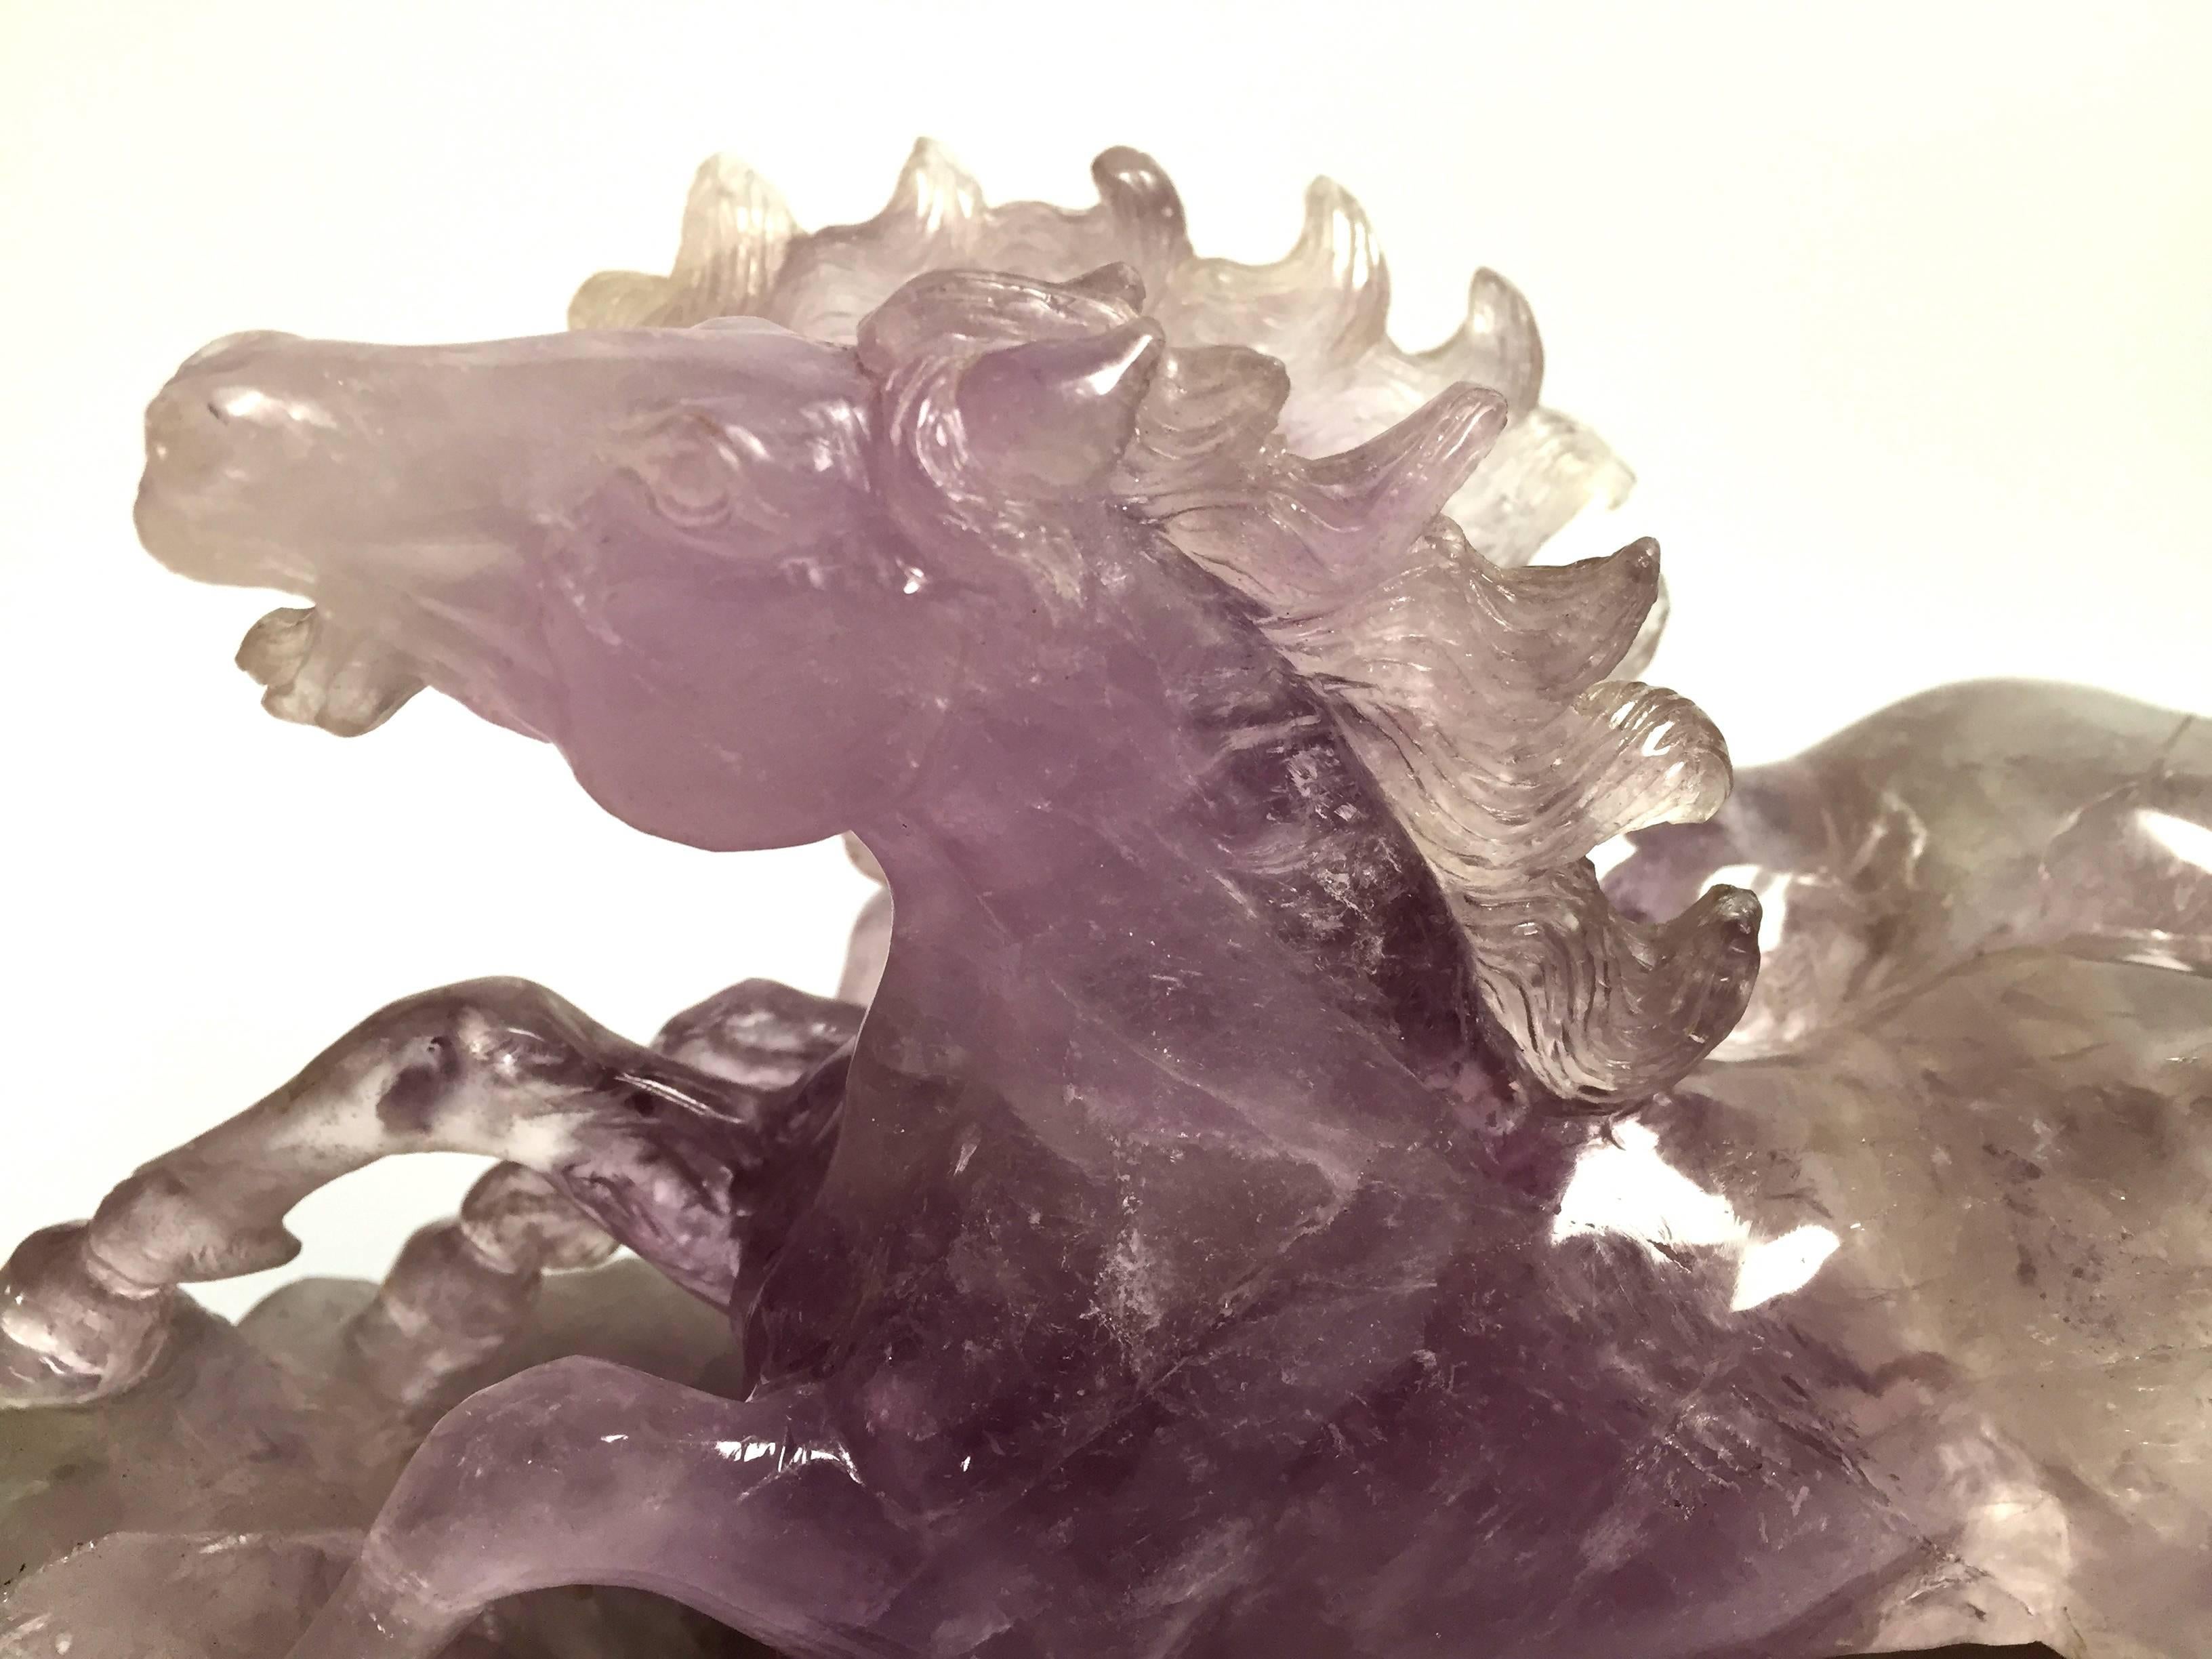 Stunning sculpture hand-carved in all natural pure amethyst. The movements of the horses and expressions are vivid. The mane, legs and muscles, as well as other facial features are exquisite. The amethyst, a semi-precious stone, use on this piece is